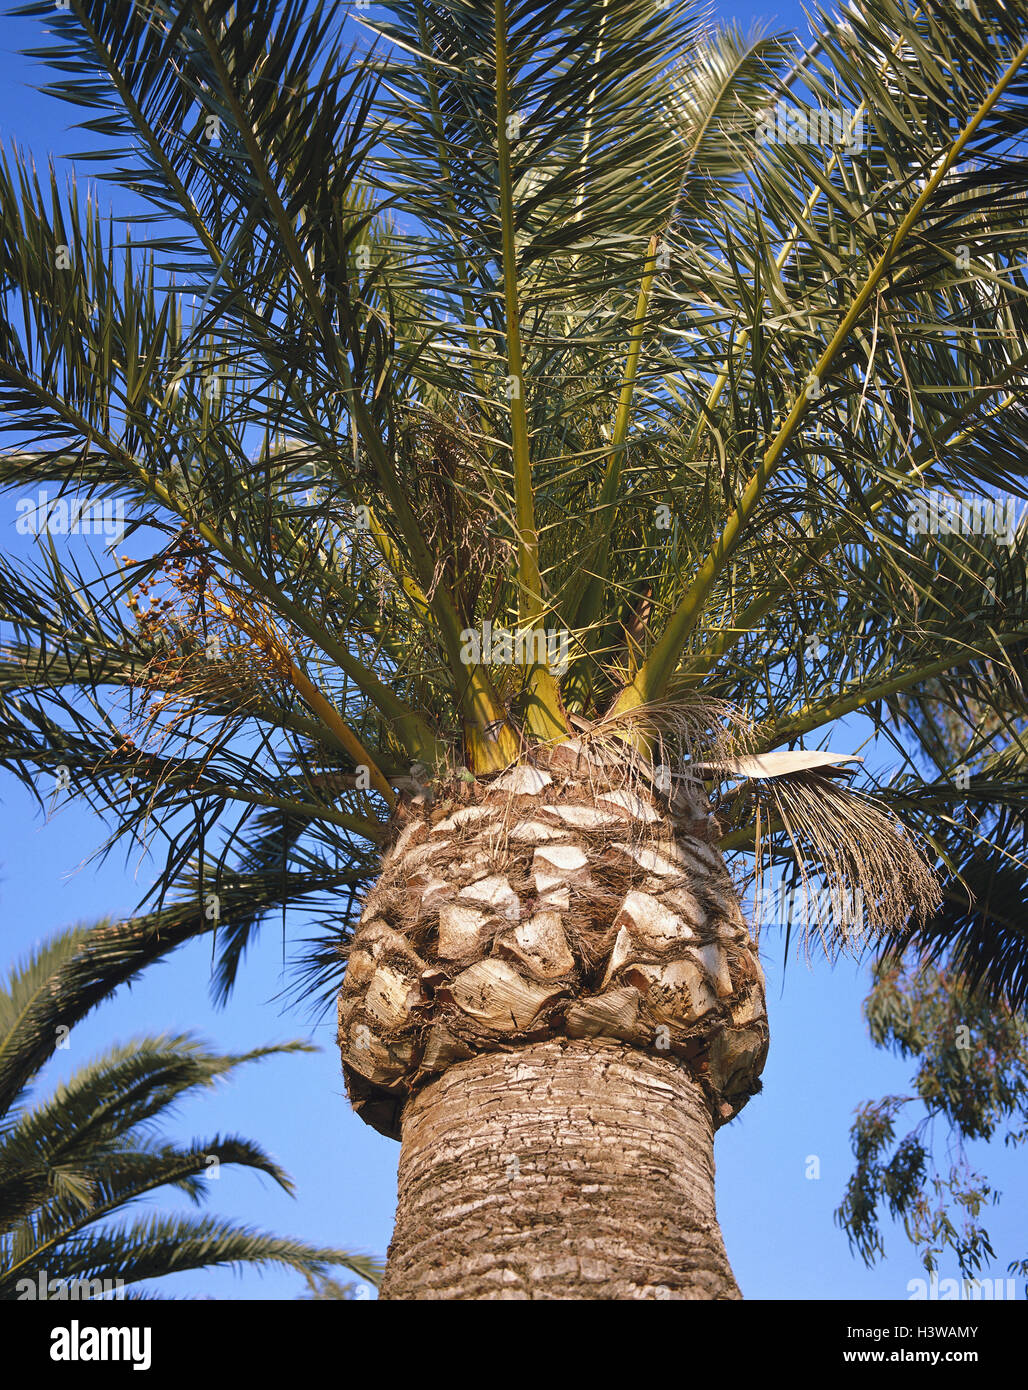 Canary date palm, phoenix canariensis, close up, nature, botany, plant, palm, date palm, Fiederpalme, Arecaceae, Palmae, wooden plants, einkeimblättrig, from below Stock Photo